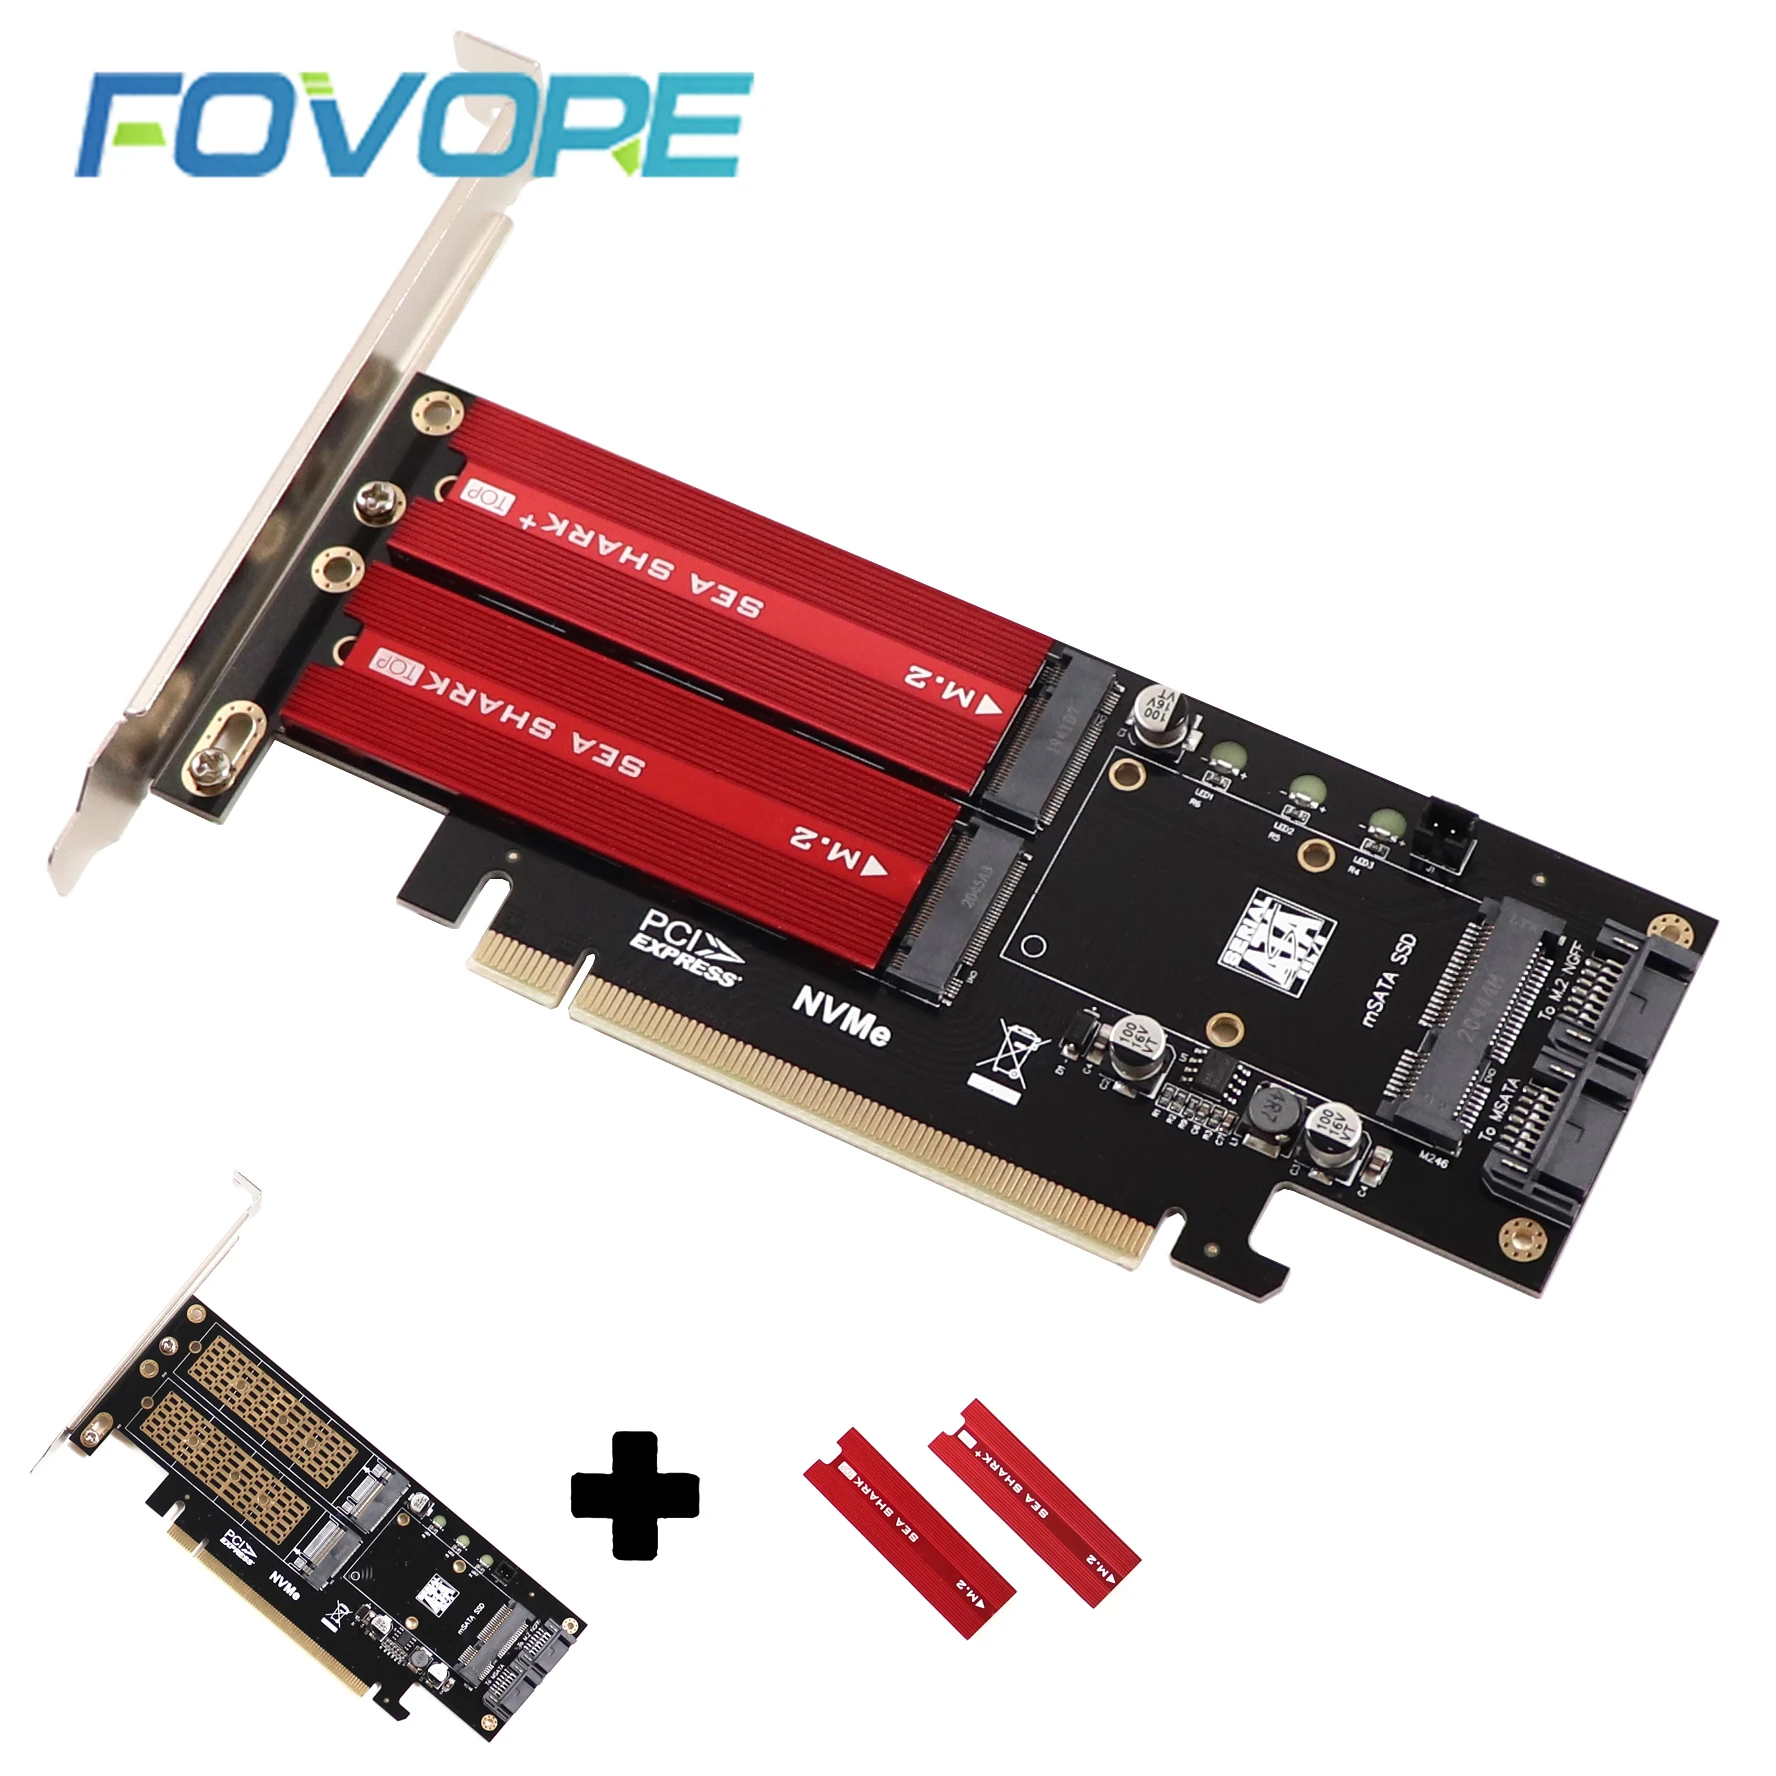 3 In 1 Ngff And Msata Ssd Adapter Card M.2 Nvme To Pcie 16x/m.2 Sata Ssd To Sata Iii/msata To Sata Converter+2 Sata Cable - Add Cards & Controller Panels - AliExpress